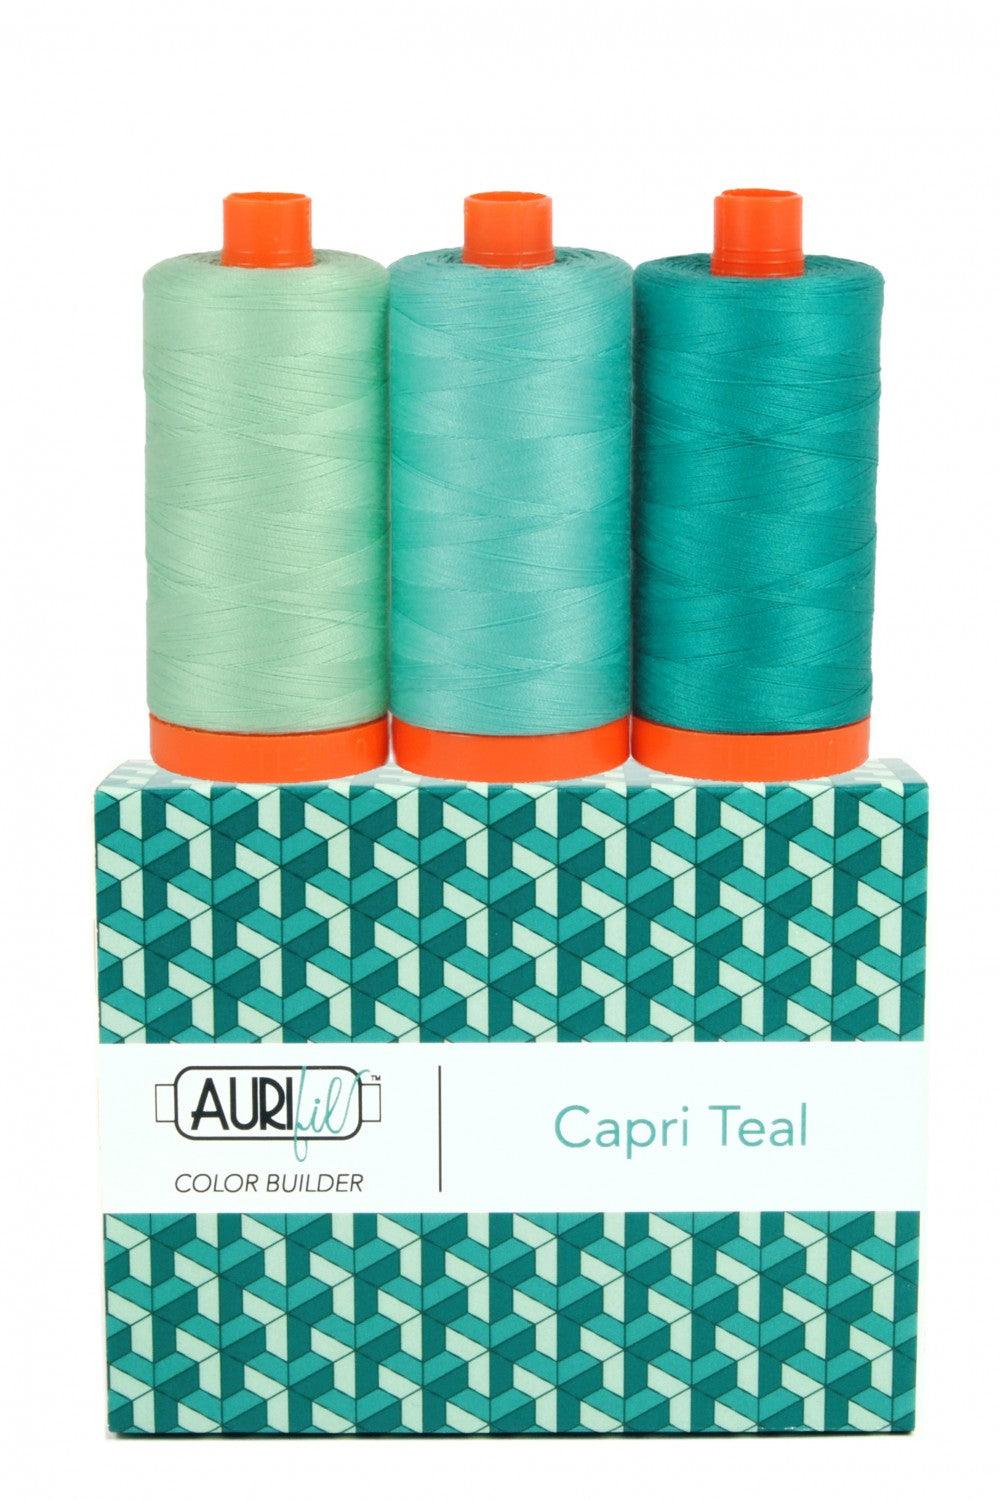 Capri Teal, Color Builder, Aurifil, 1300m, Package of 3 - Kawartha Quilting and Sewing LTD.